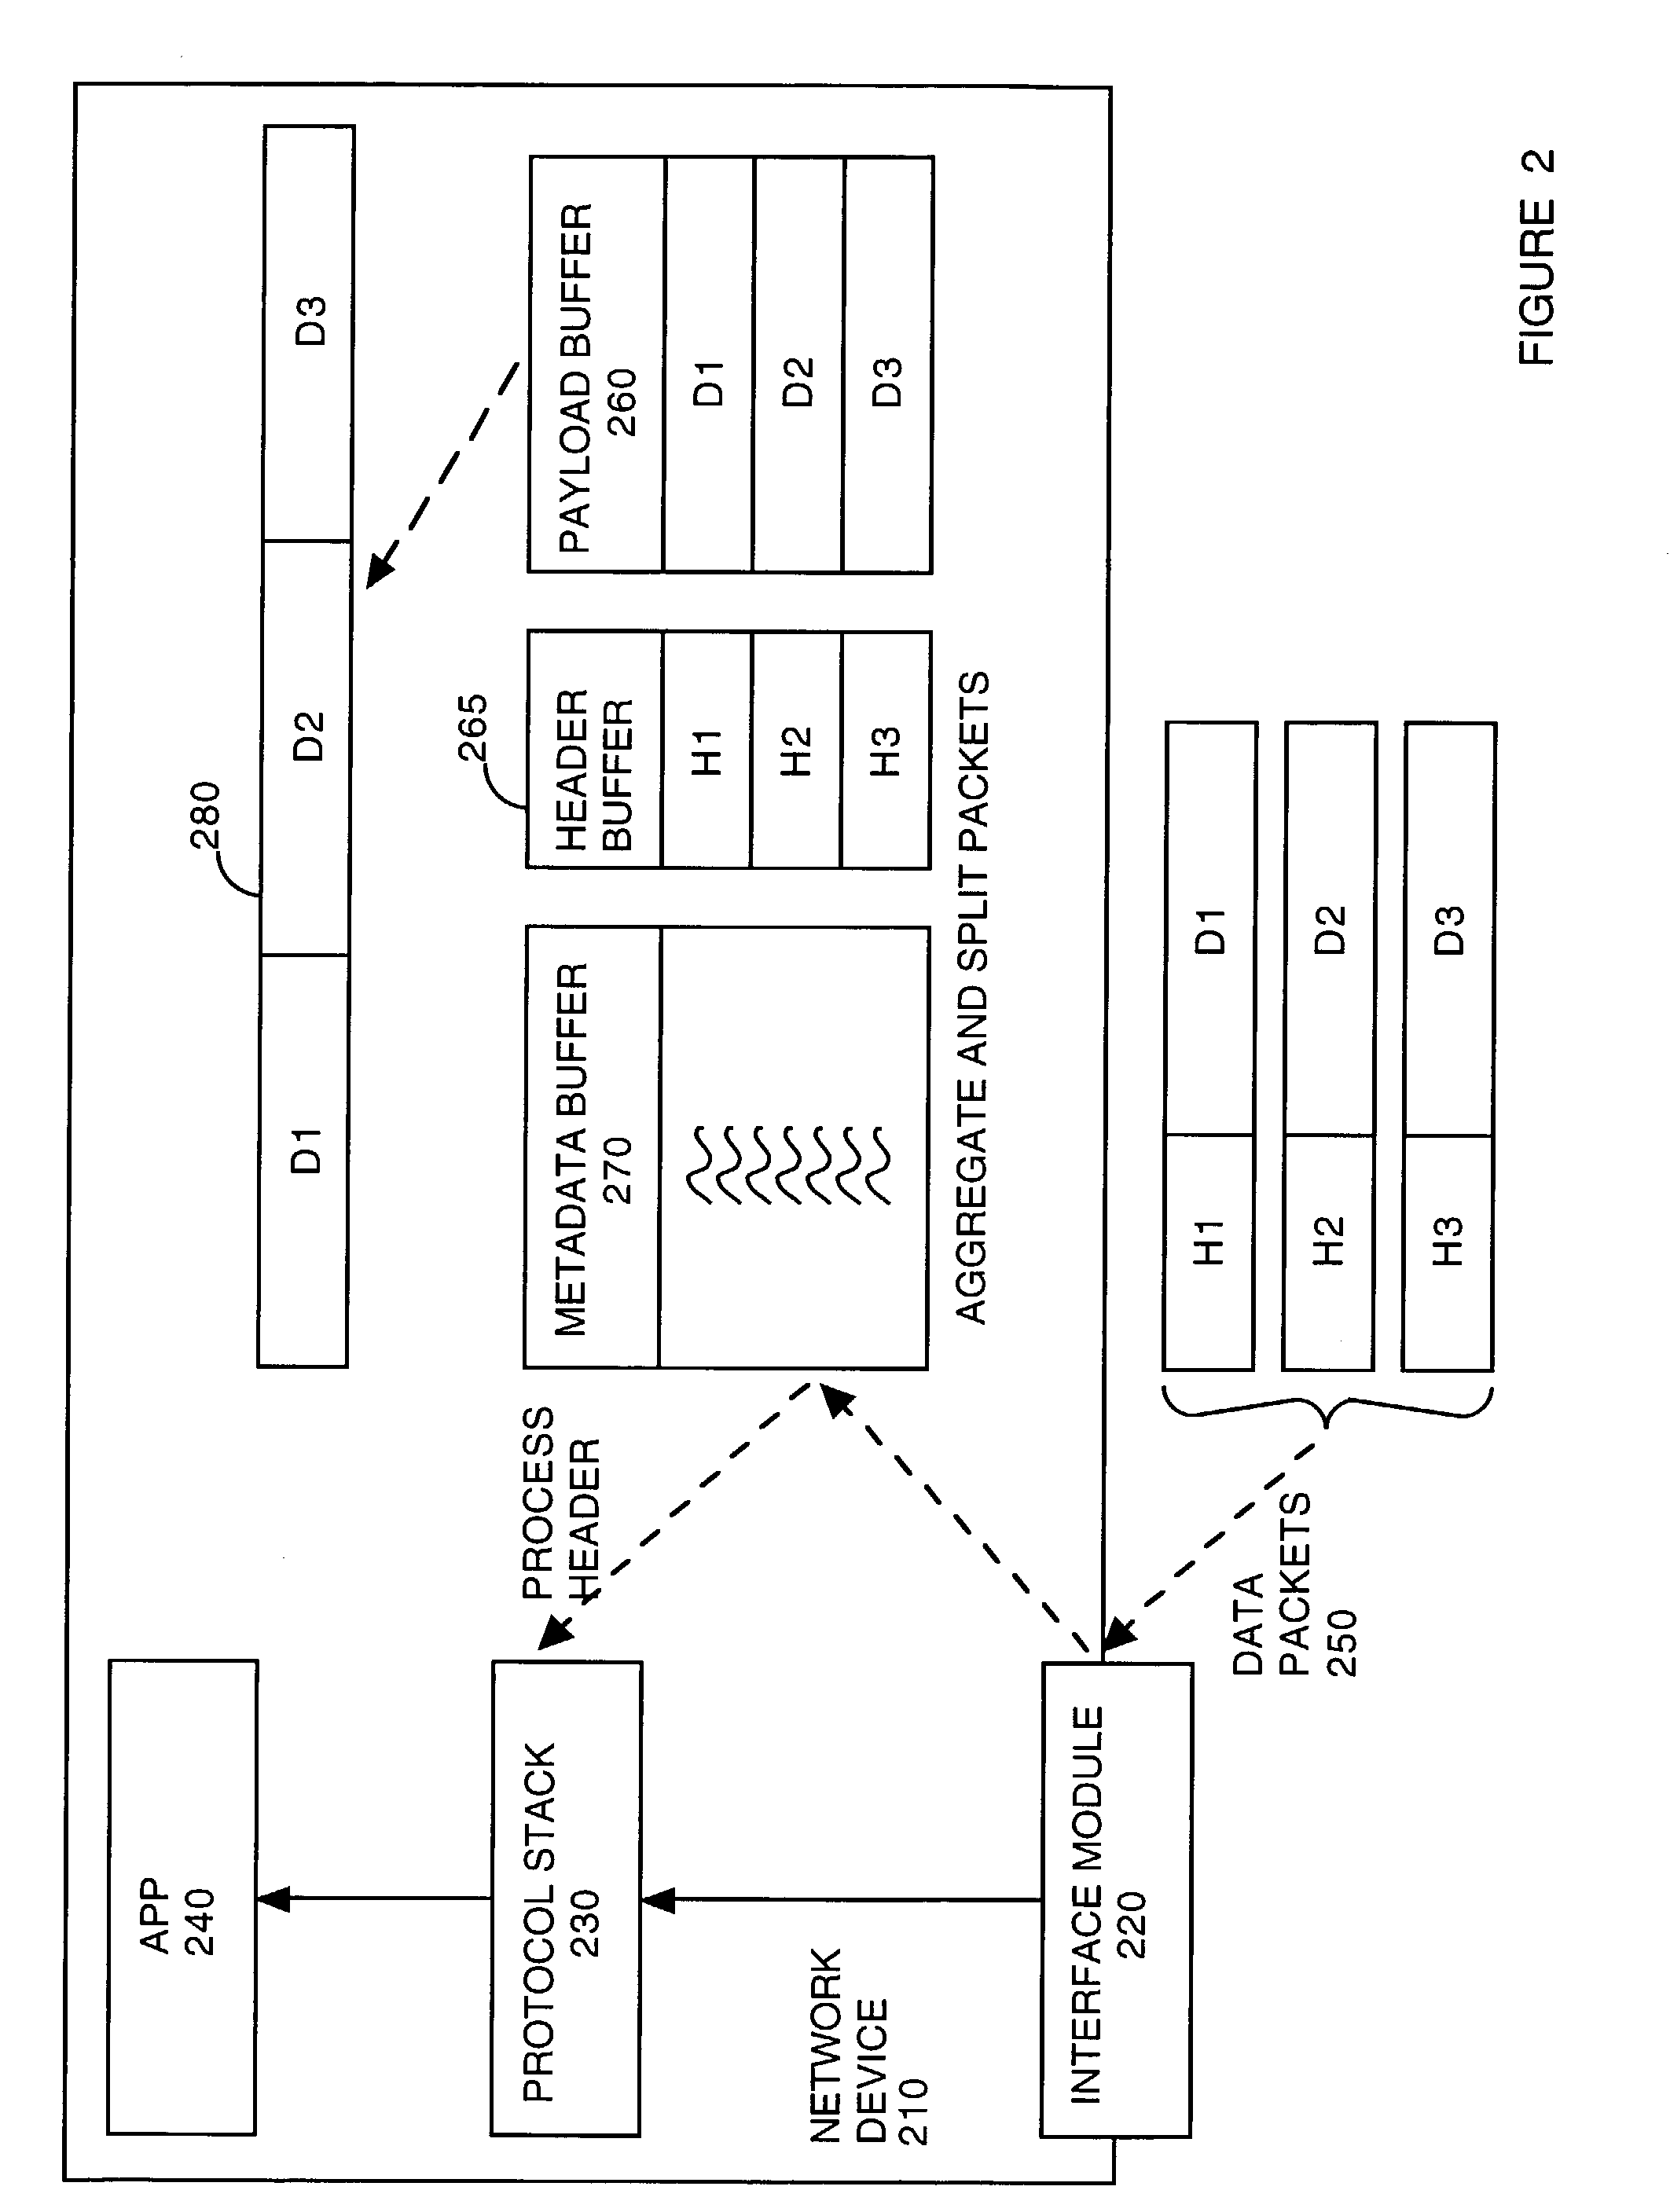 Load-balancing utilizing one or more threads of execution for implementing a protocol stack